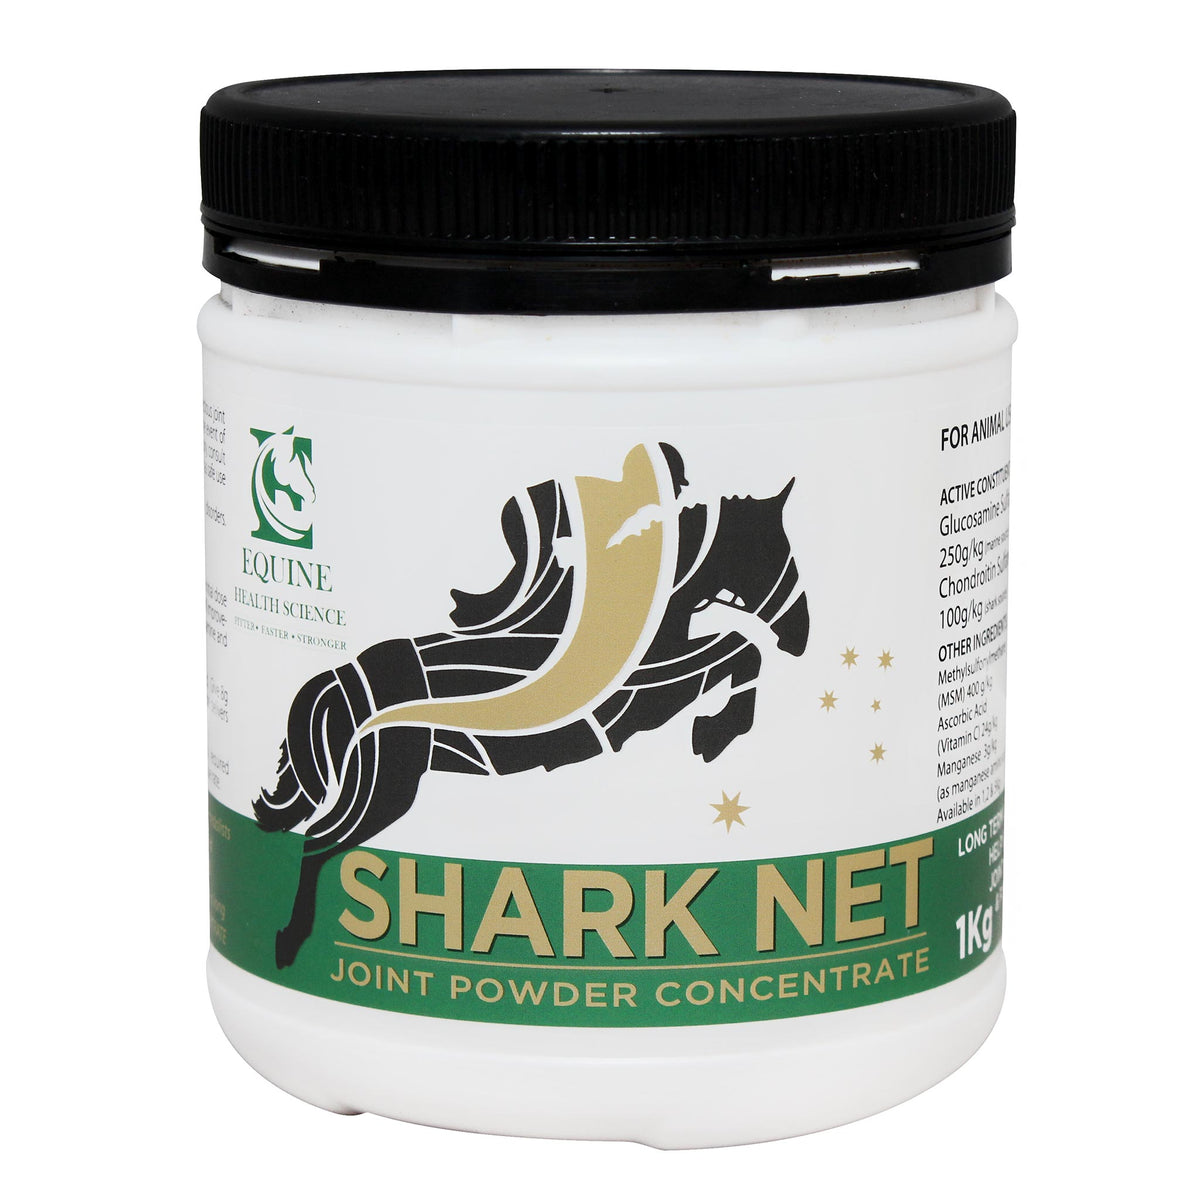 Shark Net Powder Concentrate for Horses